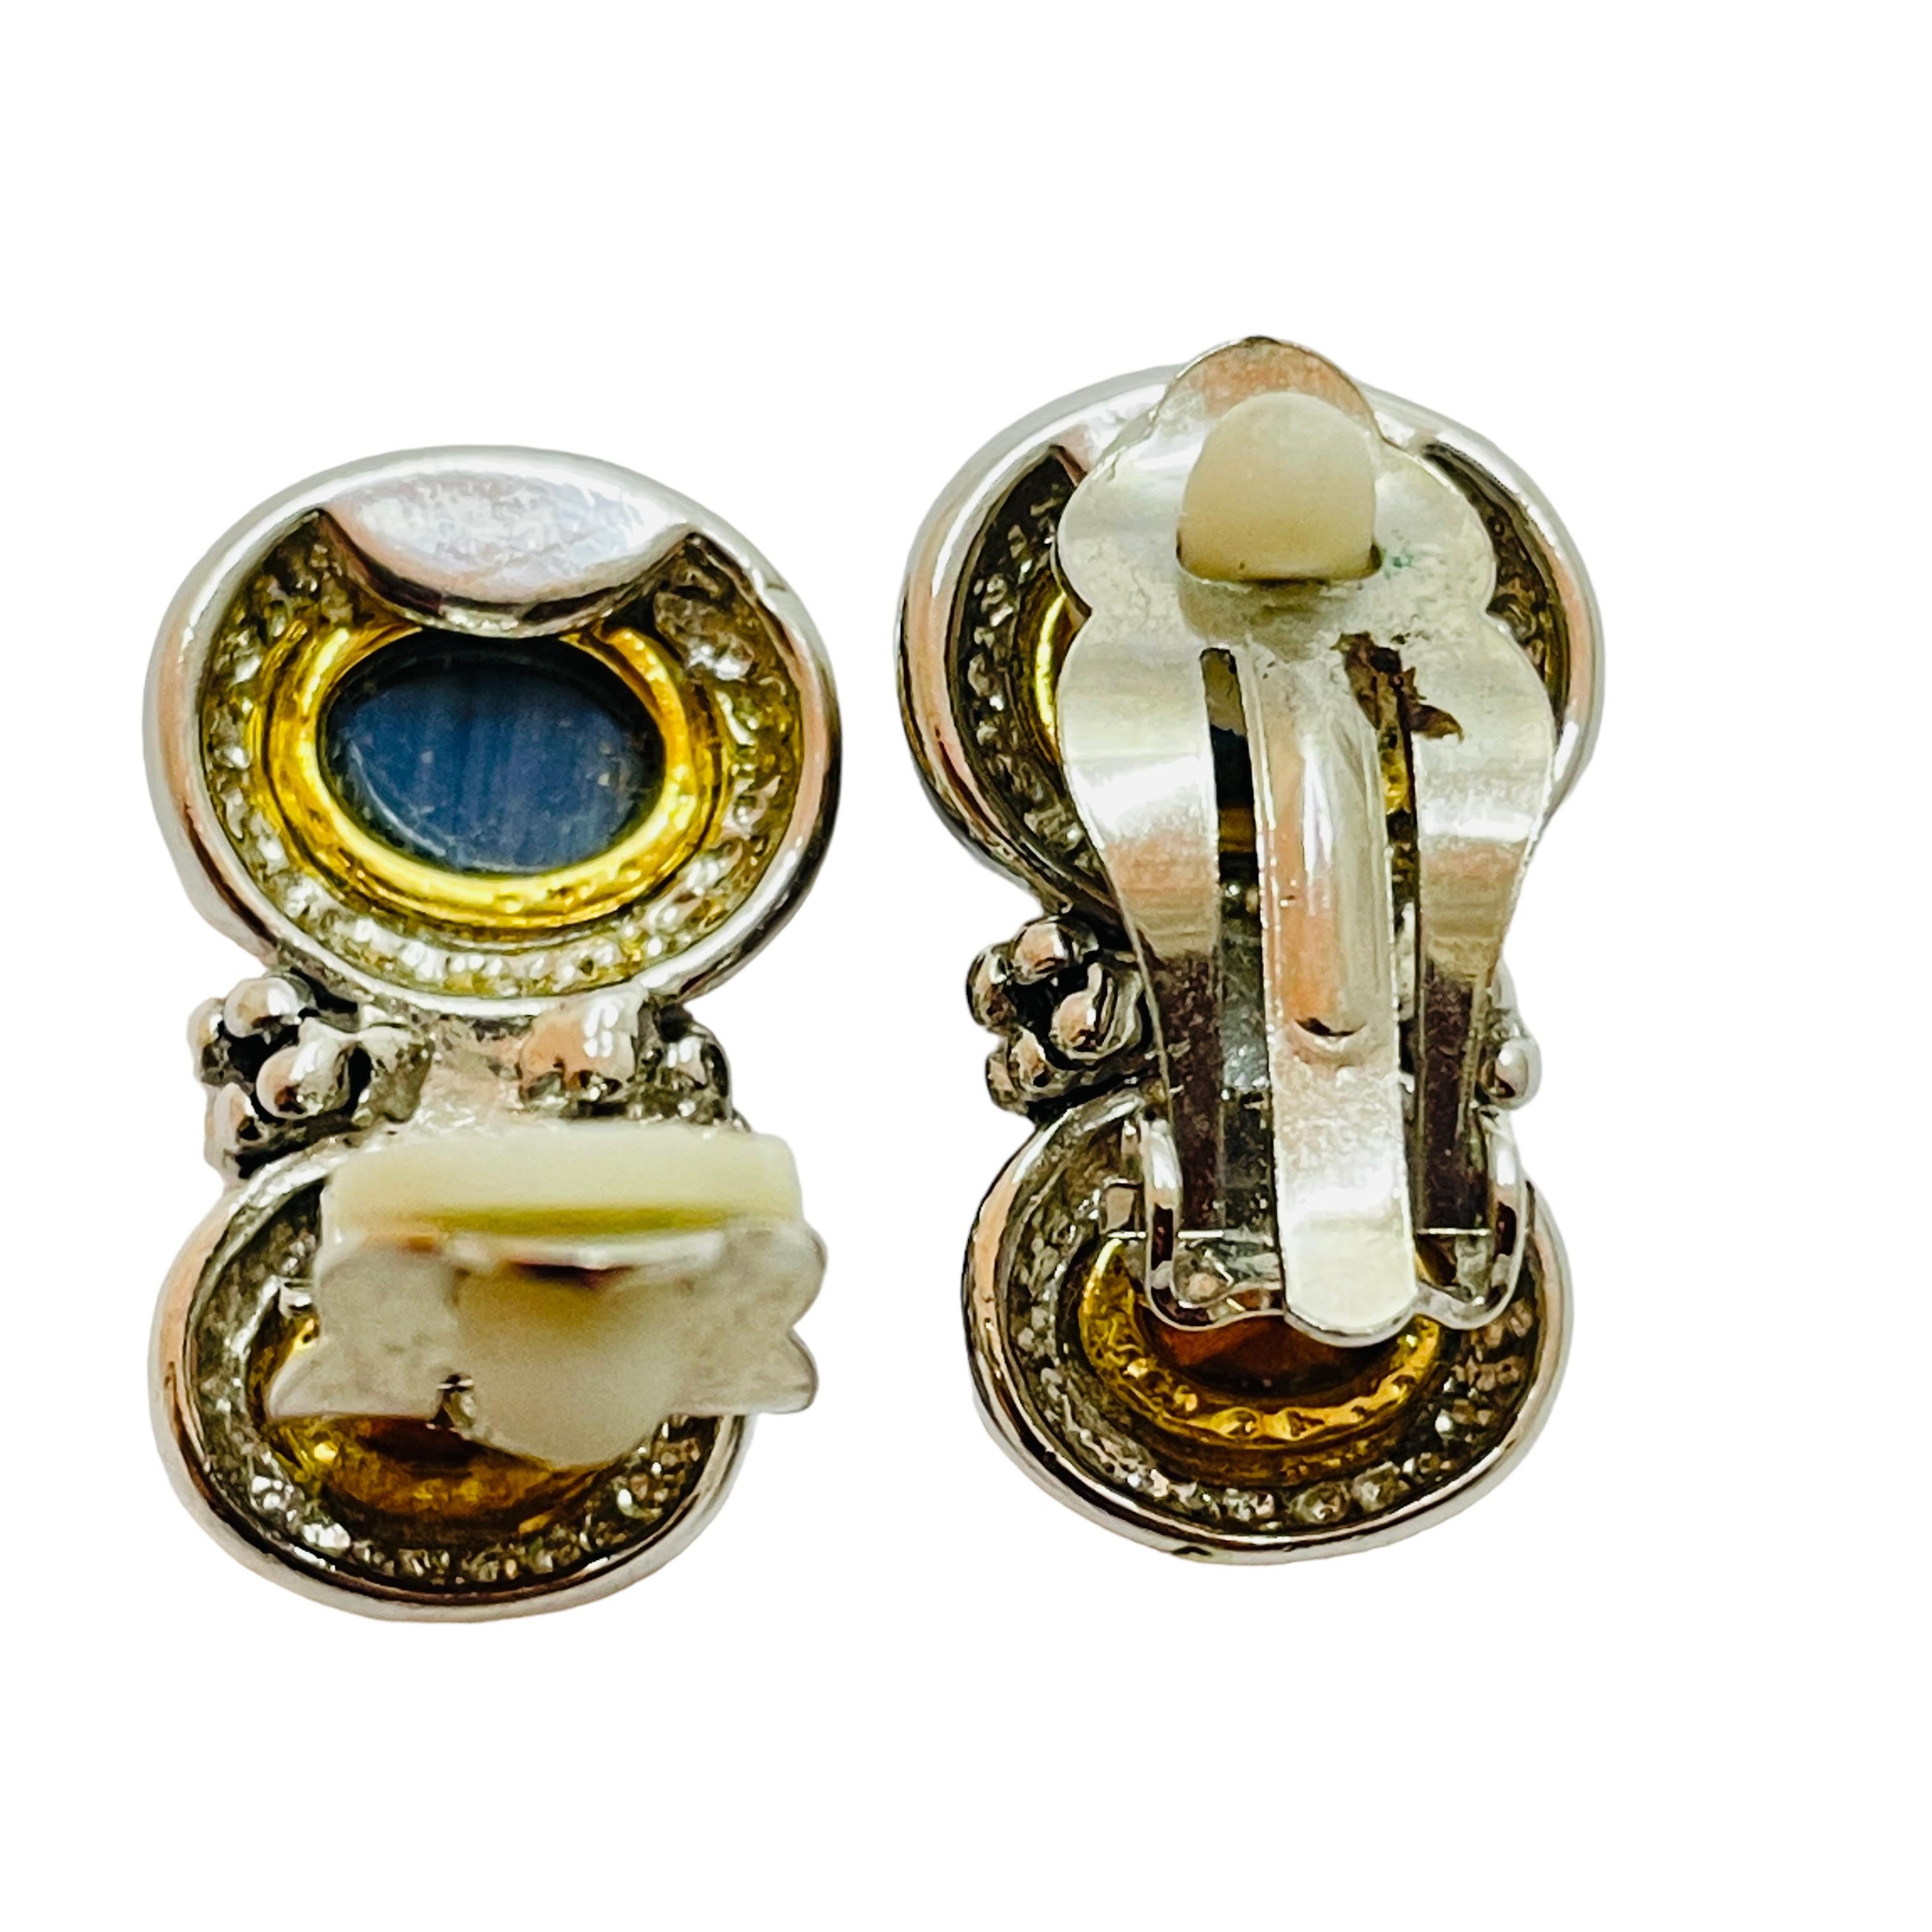 Vintage gold silver blue clip on earrings In Excellent Condition For Sale In Palos Hills, IL